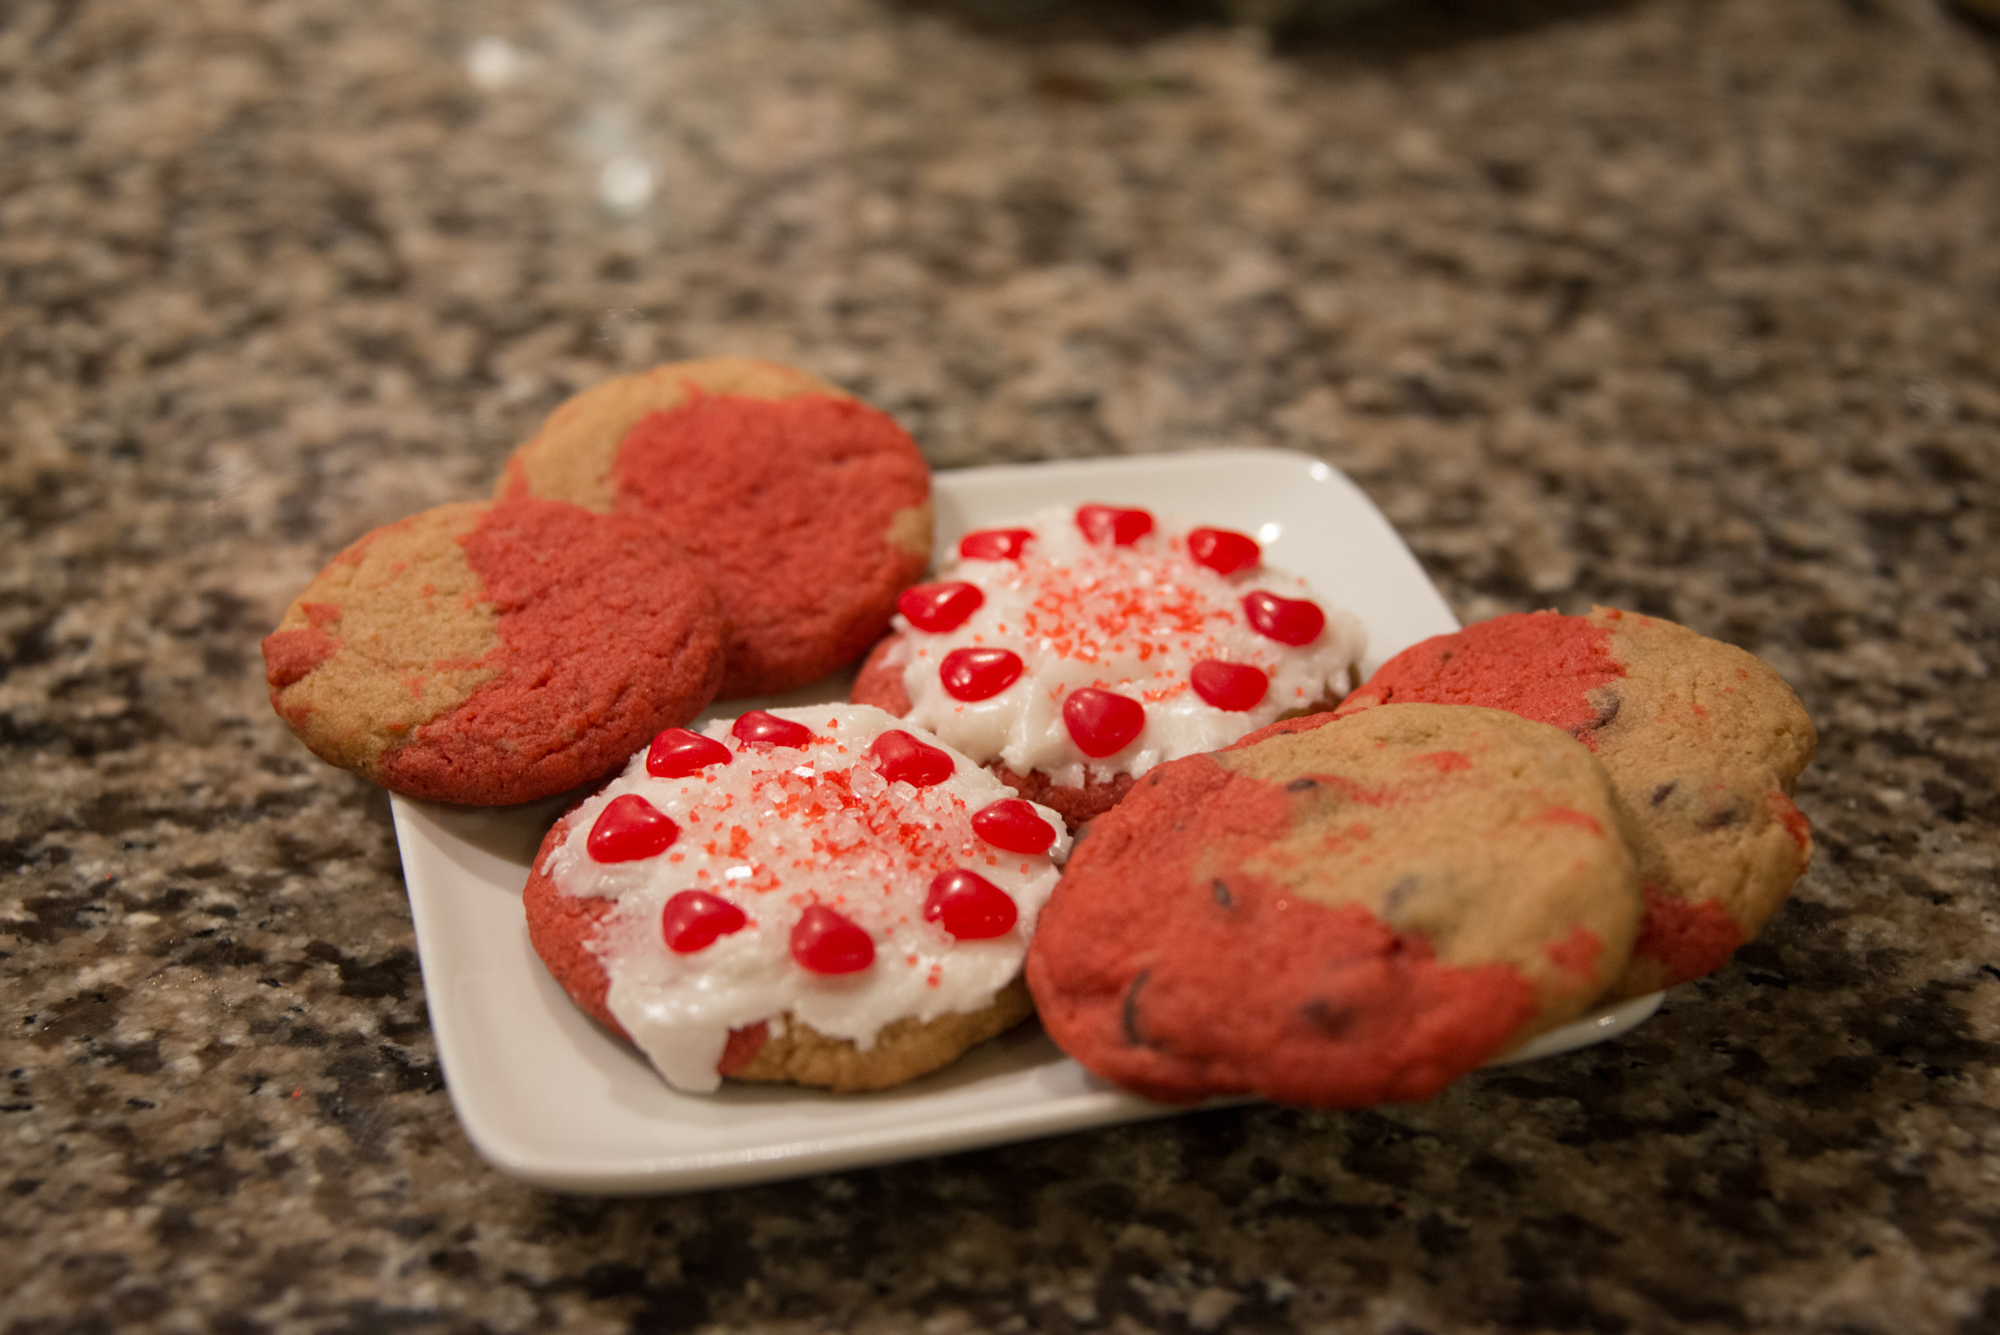 Chocolate chip cookies, non-chocolate non-chip cookies, and decorated cookies! Image (c) 2013 Jason Enevoldsen